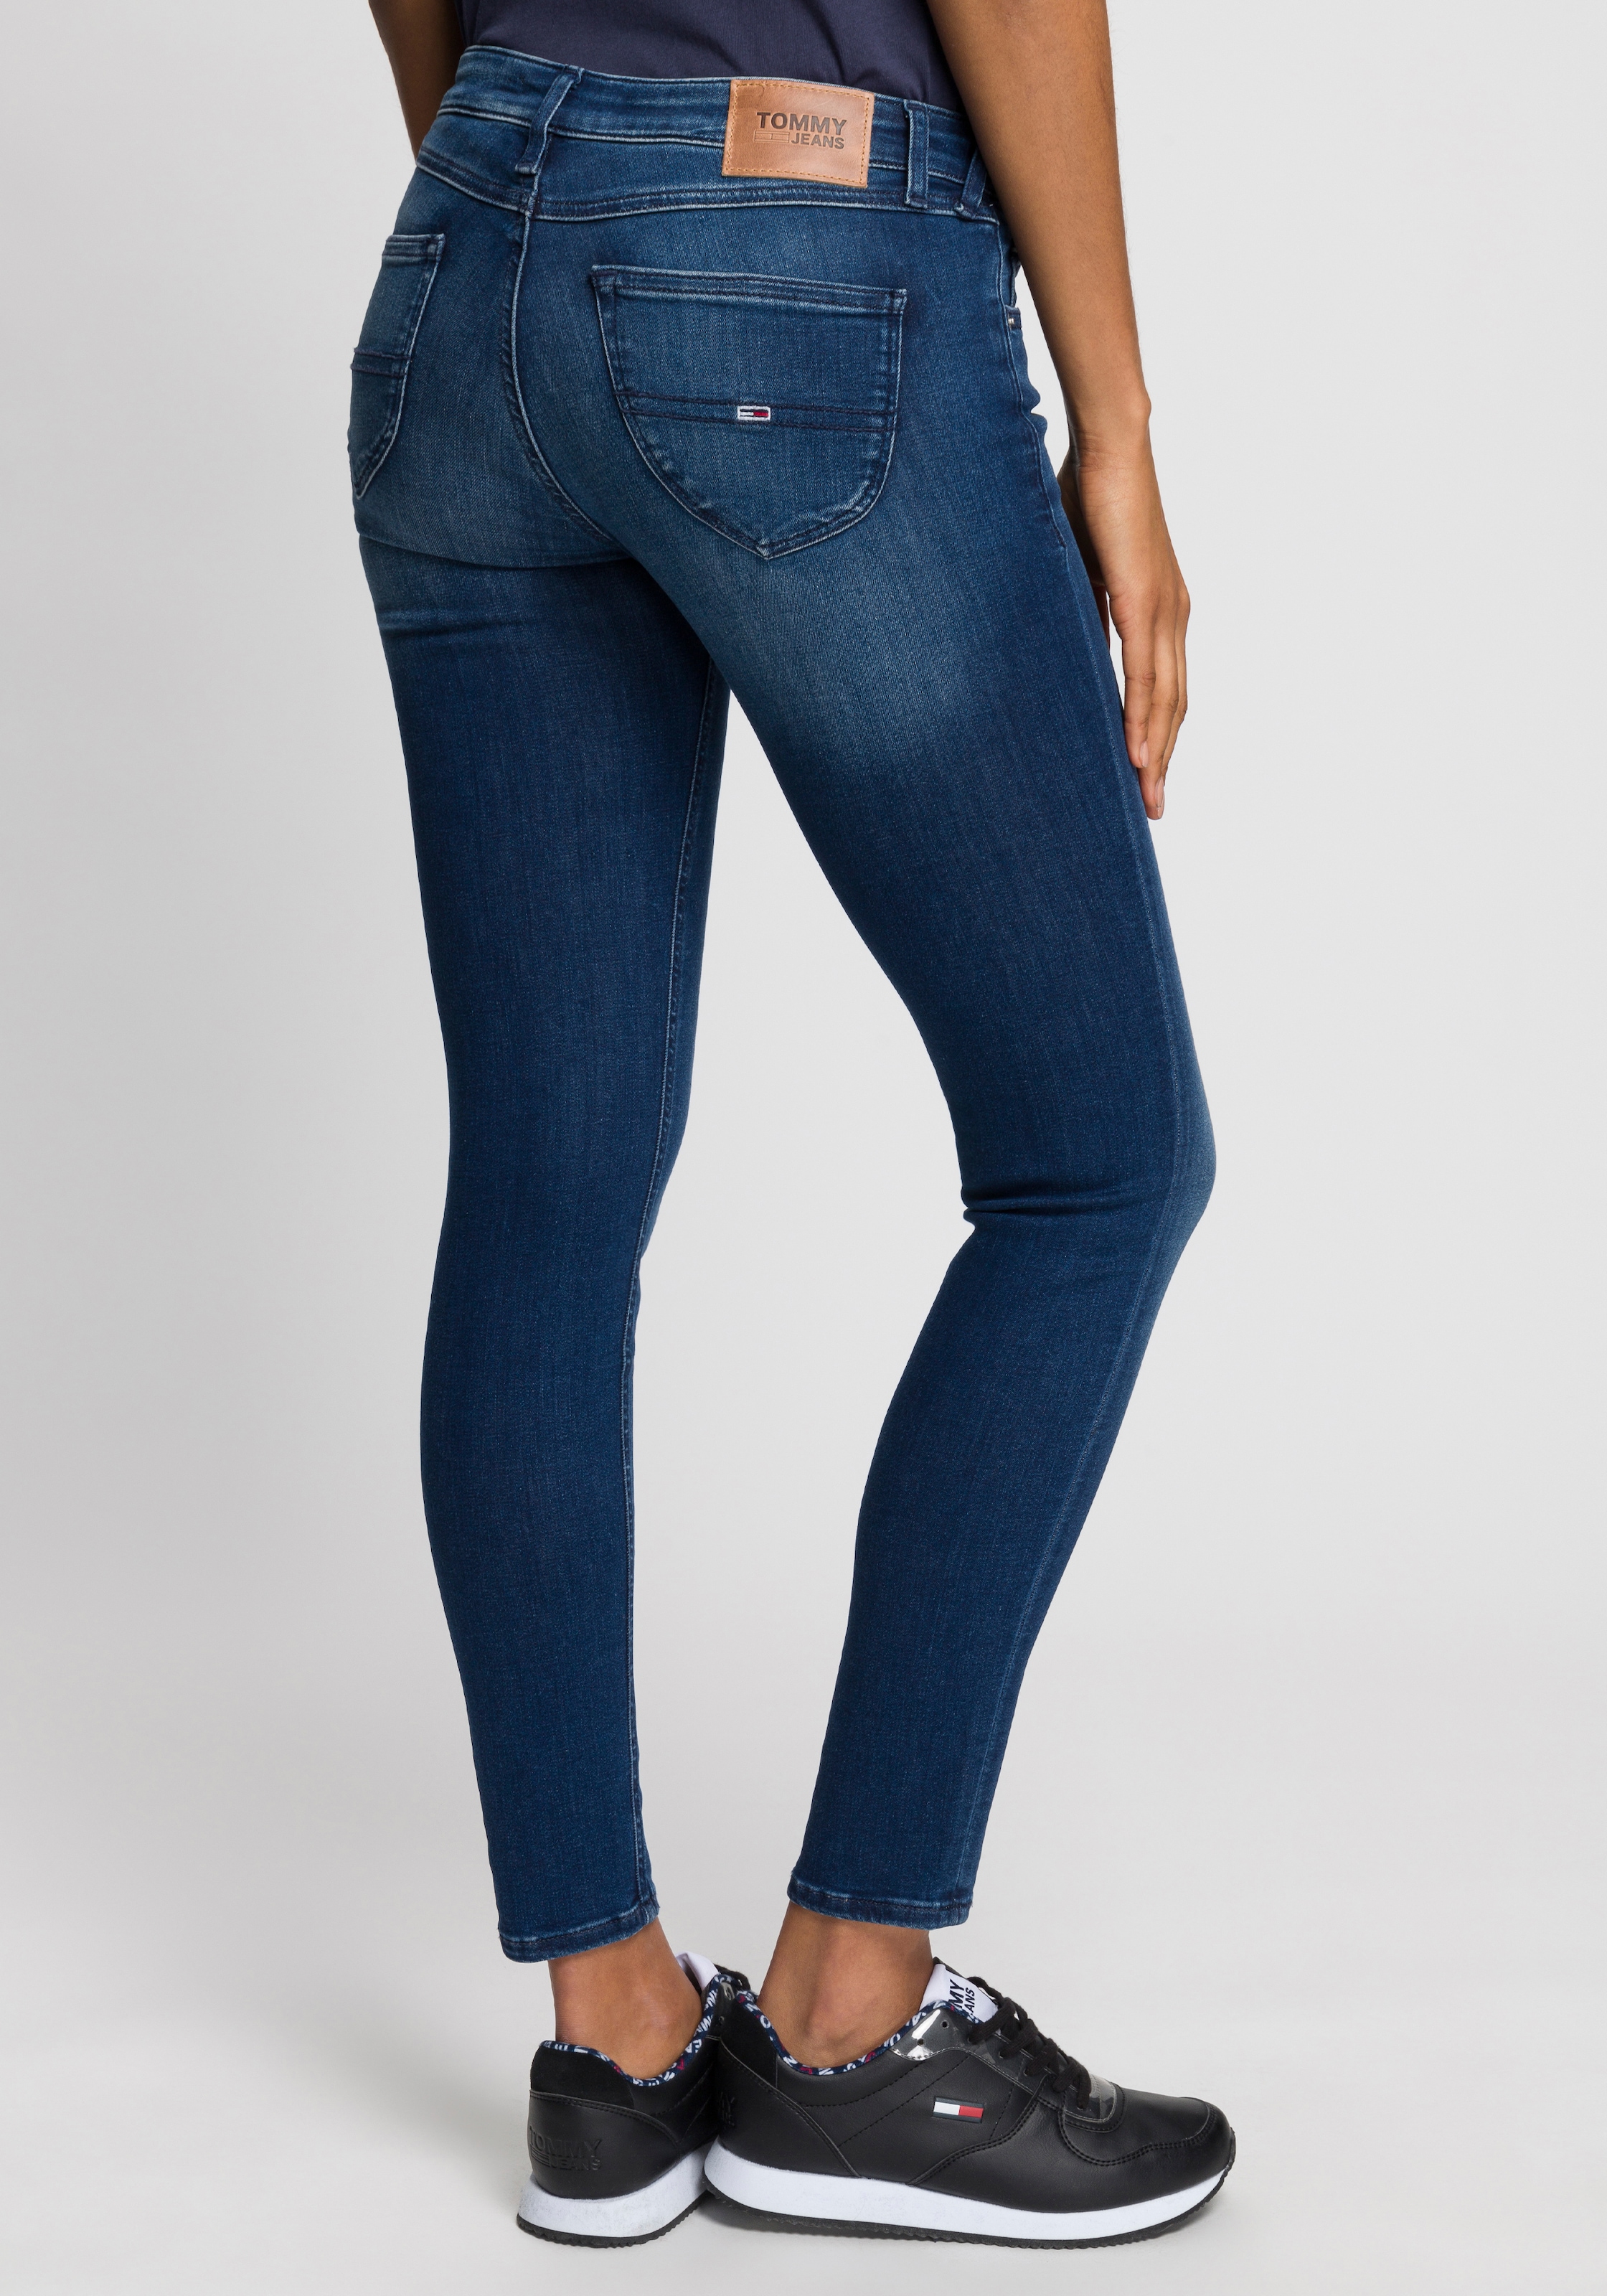 mit Stretch, ♕ Jeans bei Tommy perfektes Skinny-fit-Jeans, Shaping für